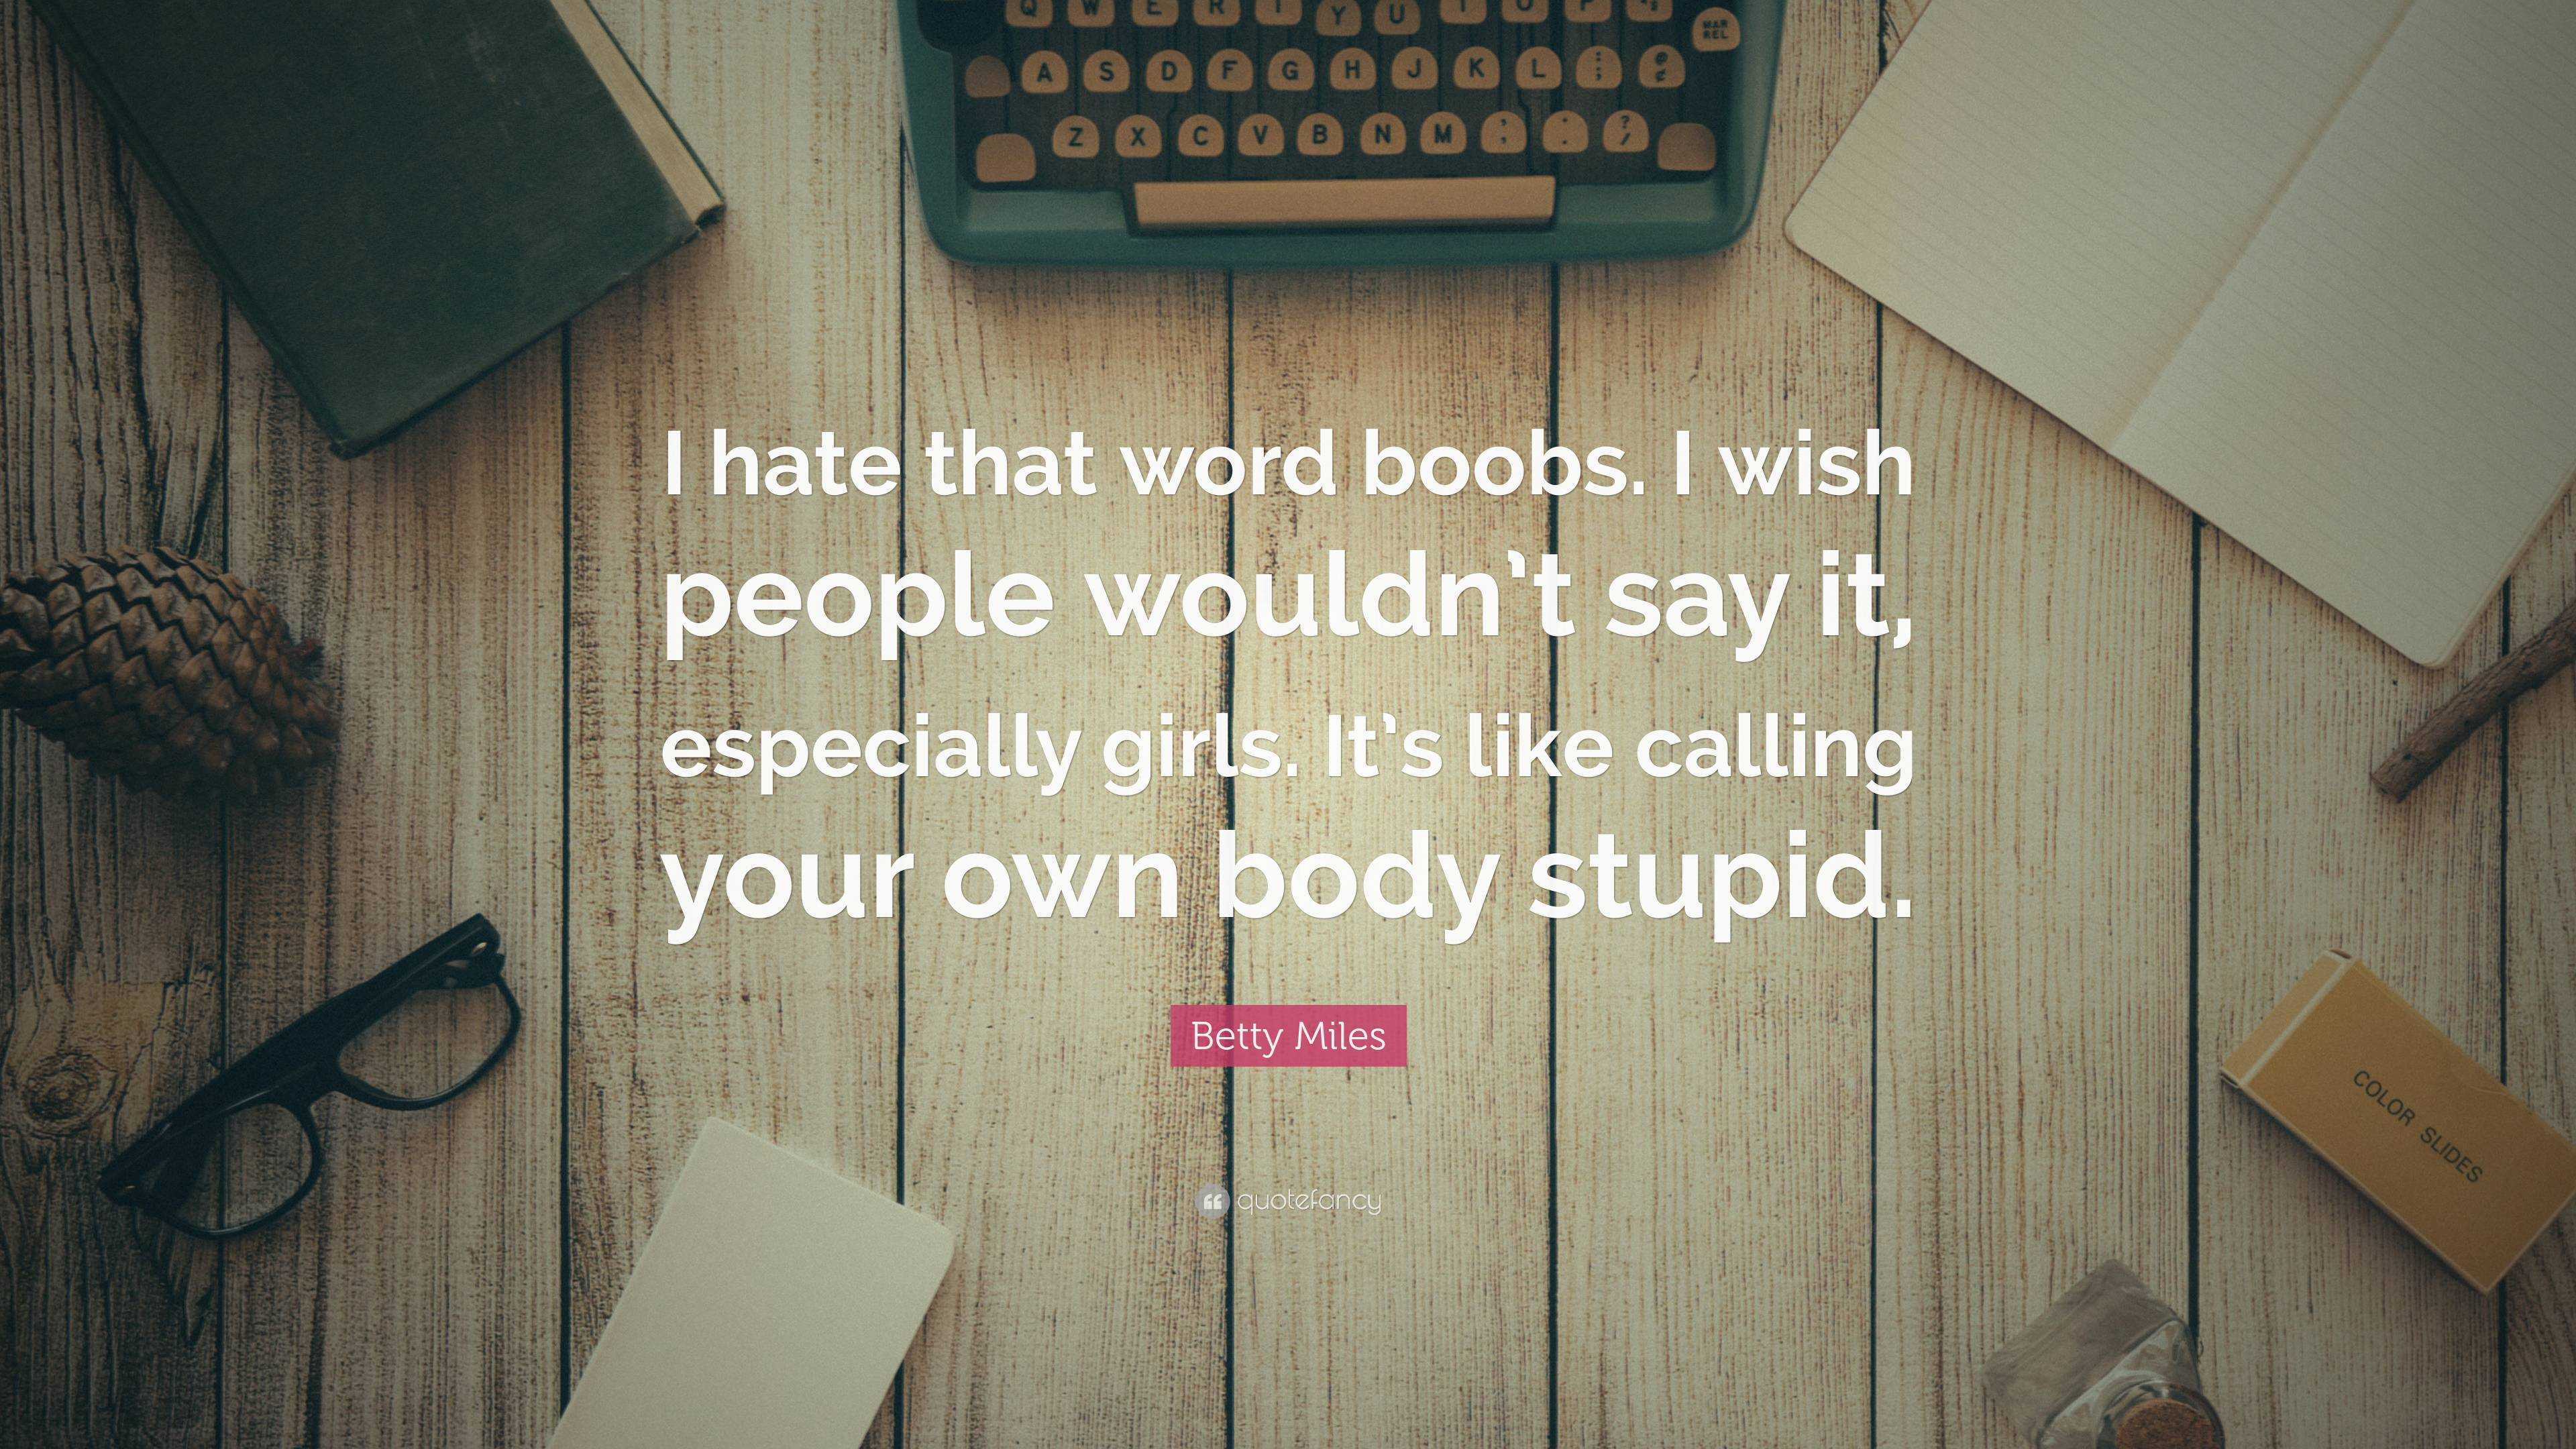 https://quotefancy.com/media/wallpaper/3840x2160/6775984-Betty-Miles-Quote-I-hate-that-word-boobs-I-wish-people-wouldn-t.jpg